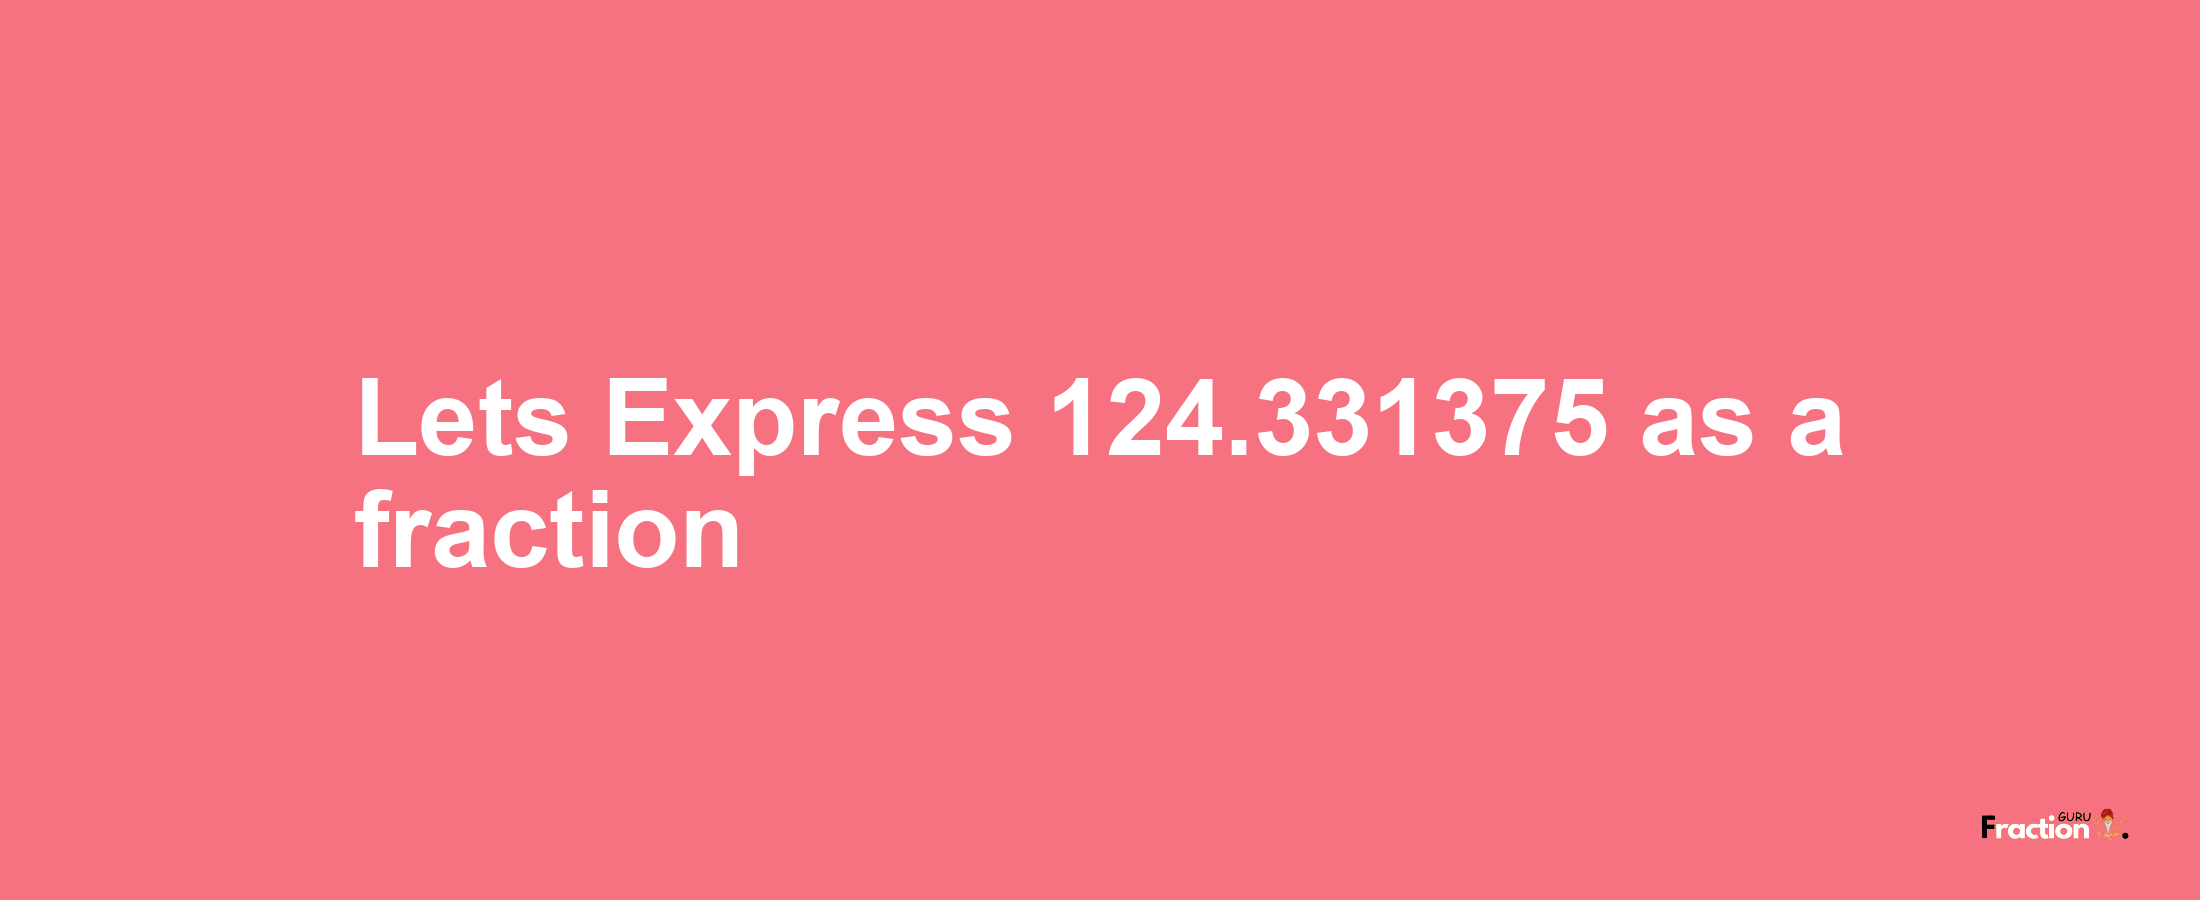 Lets Express 124.331375 as afraction